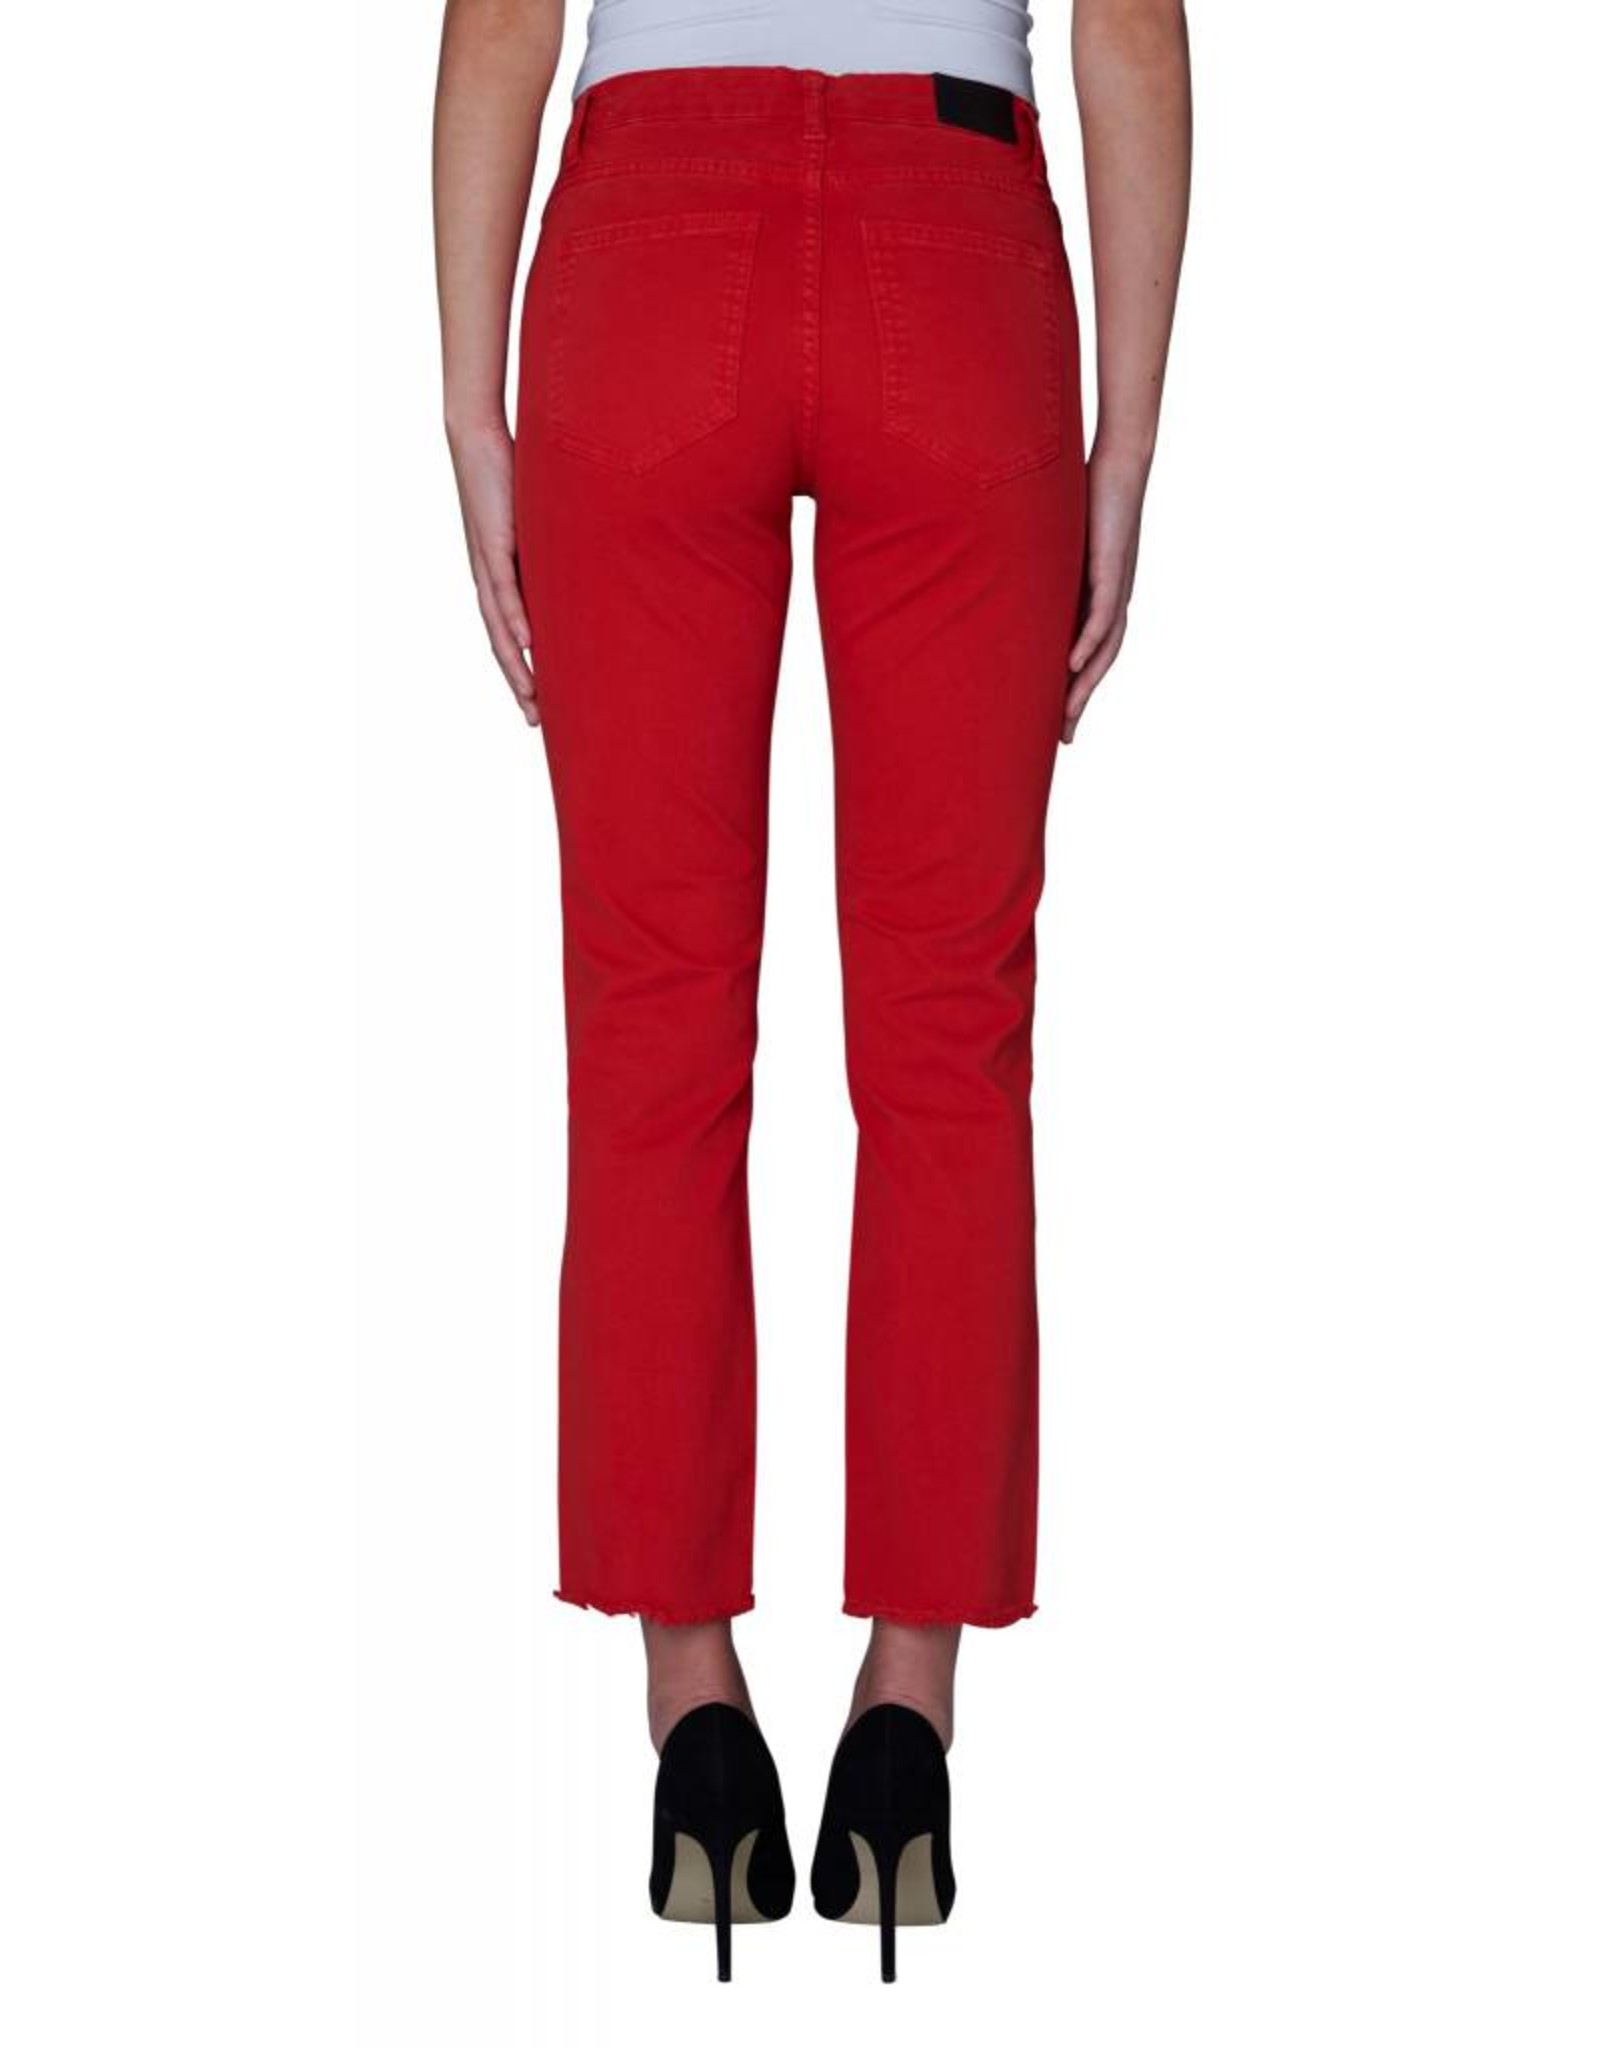 2nd red jeans